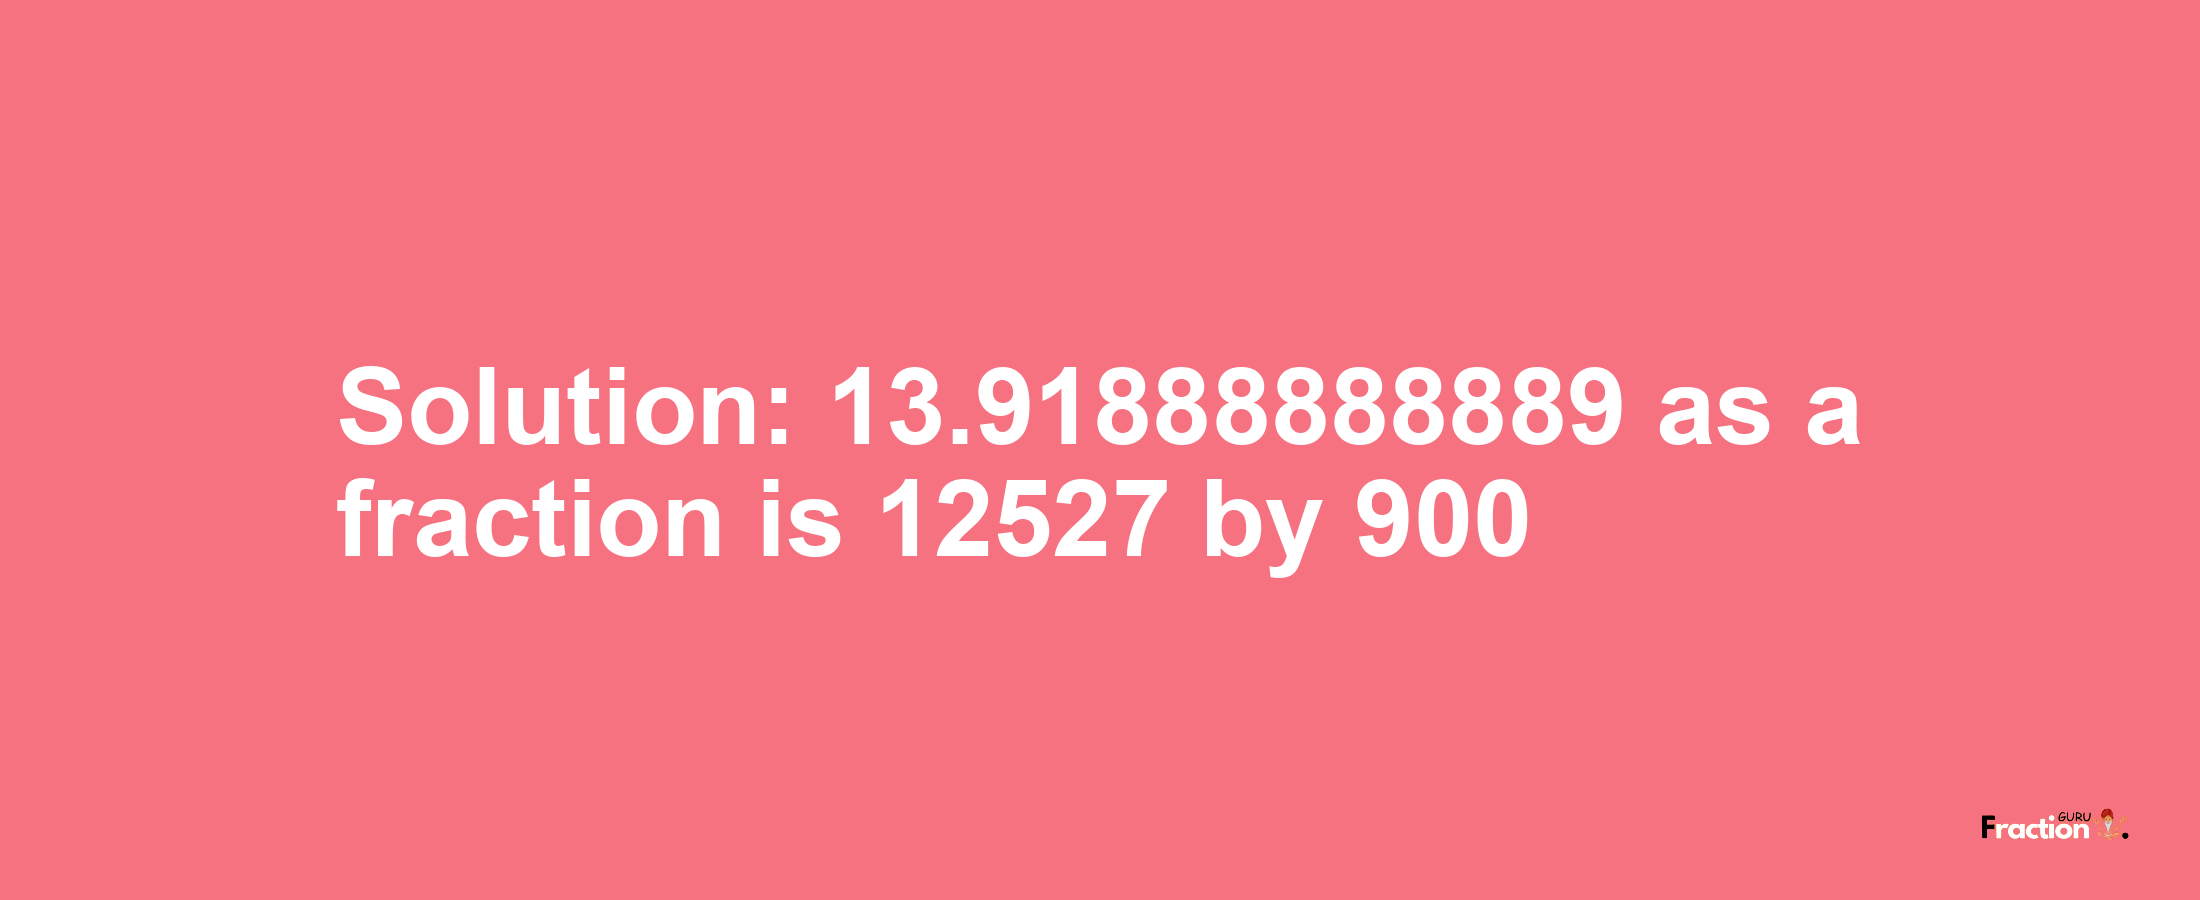 Solution:13.91888888889 as a fraction is 12527/900